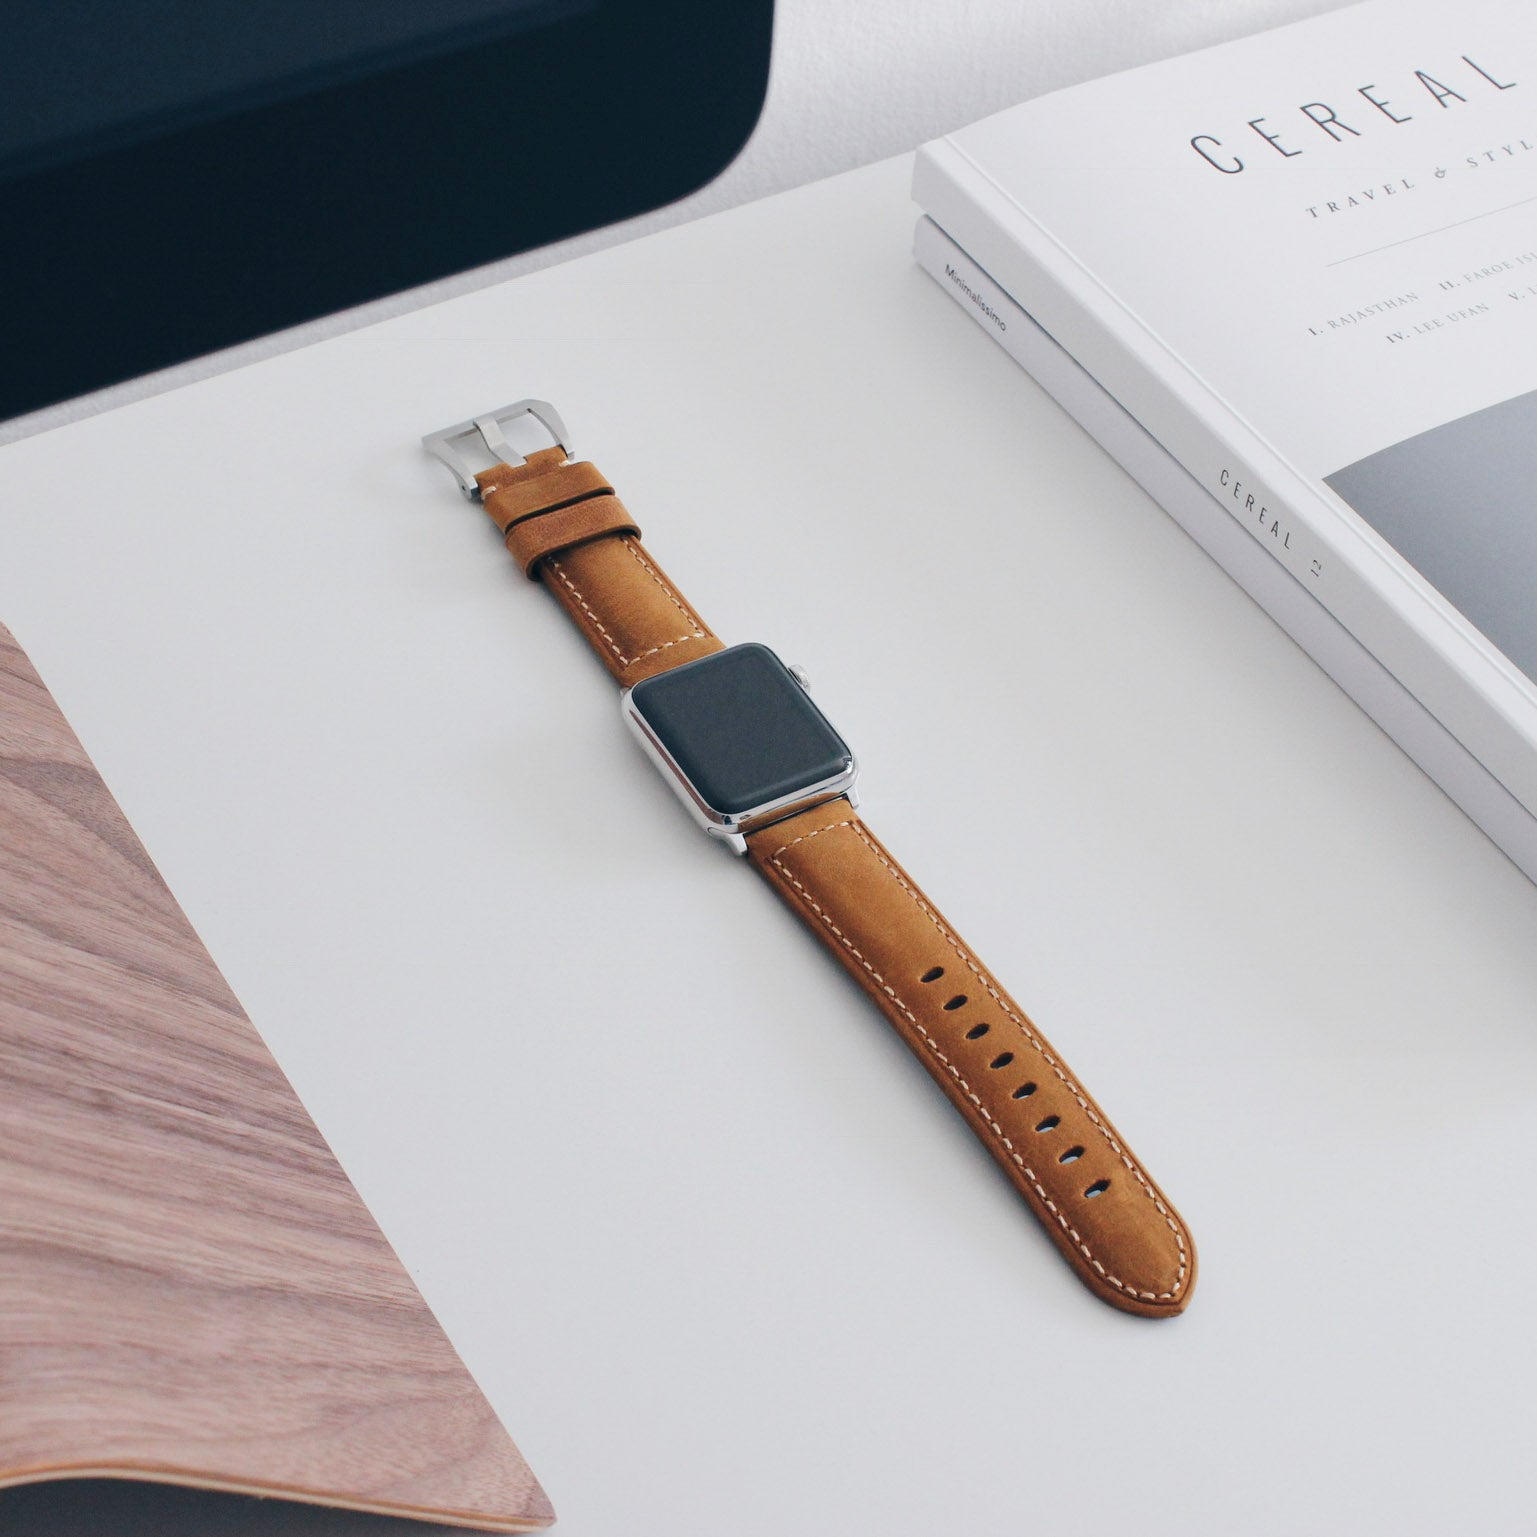 Leather Apple Watch Strap - Classic